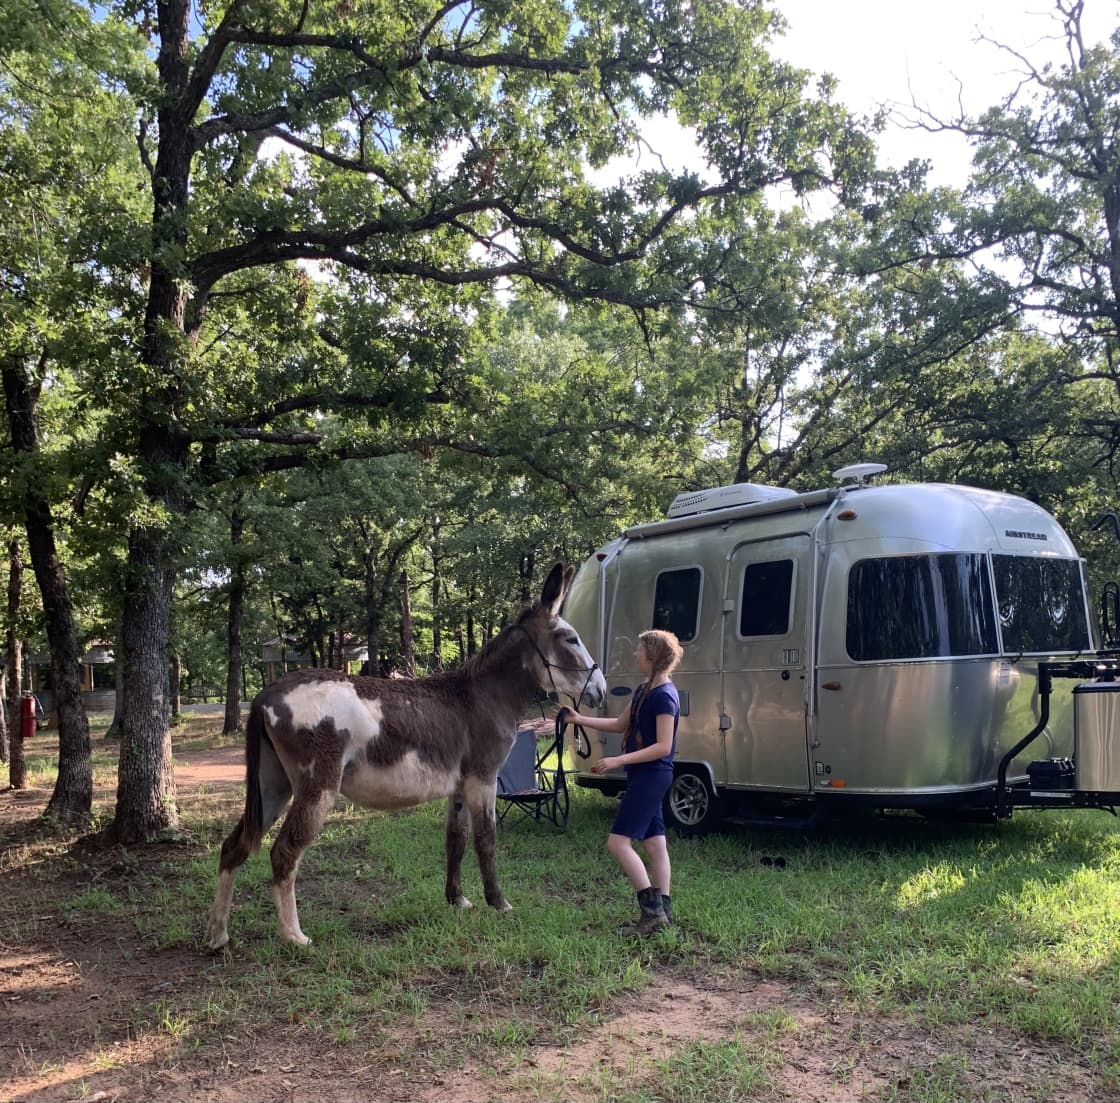 Airstream at Hope Hill gets a visit from one of the mammoth donkeys (Sparrow!)